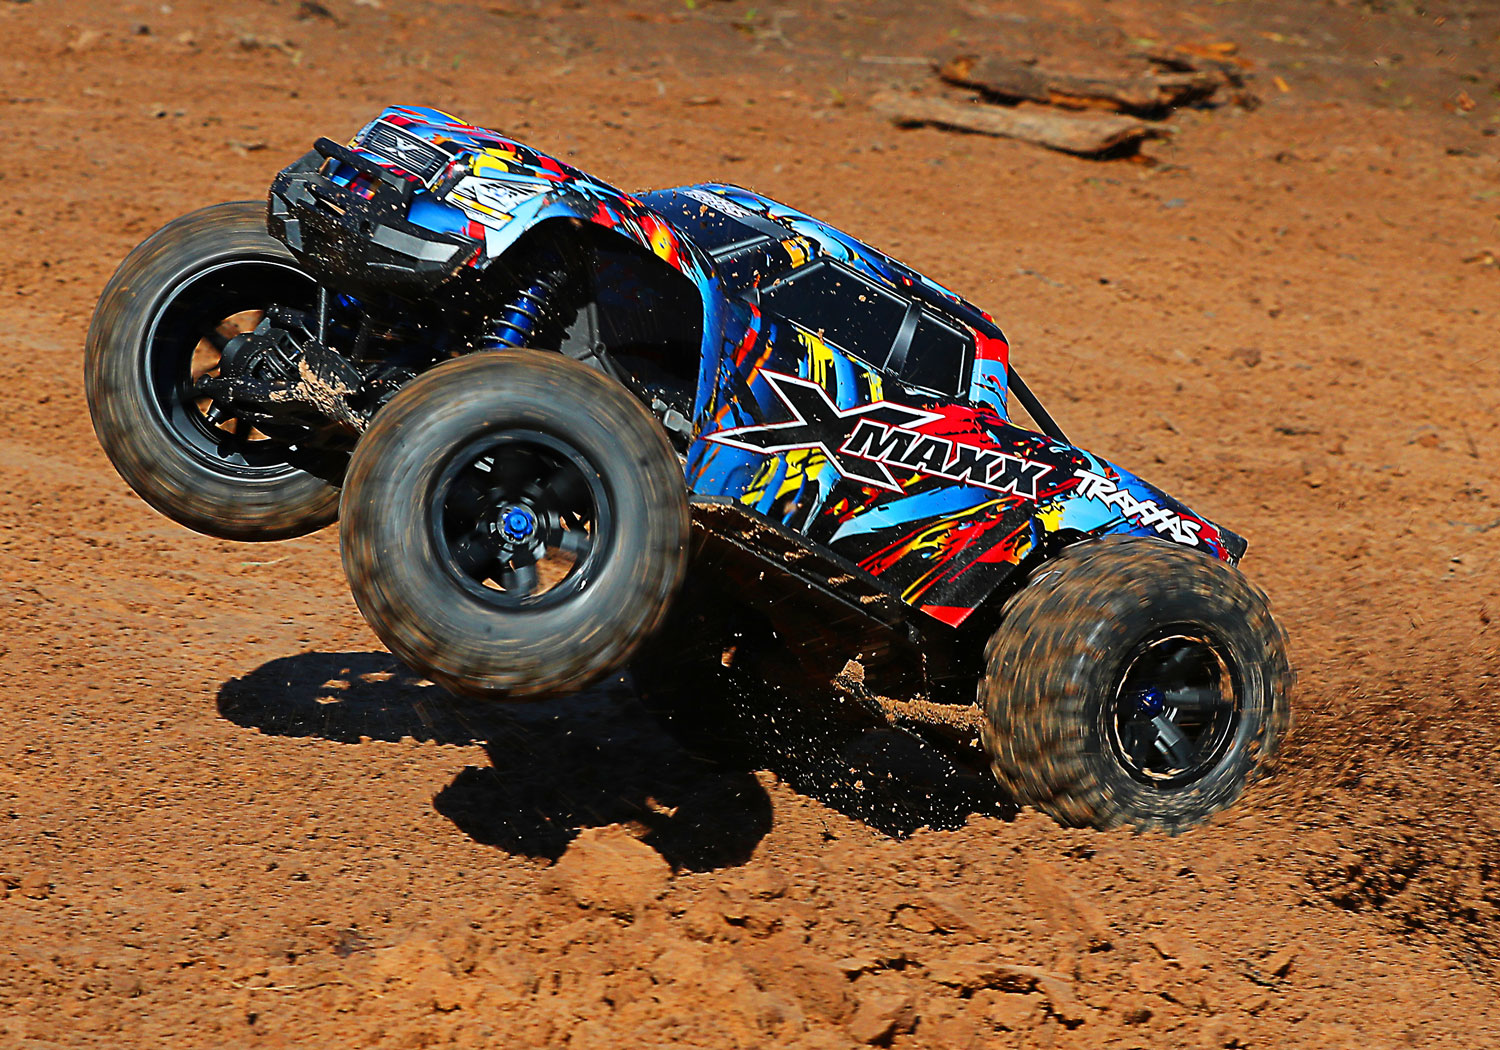 traxxas-77086-4-RnR-8-X-MAXX-4wd-8s-Brushless-Pick-Up-Truck-the-evolution-of-tough-Monstermachine